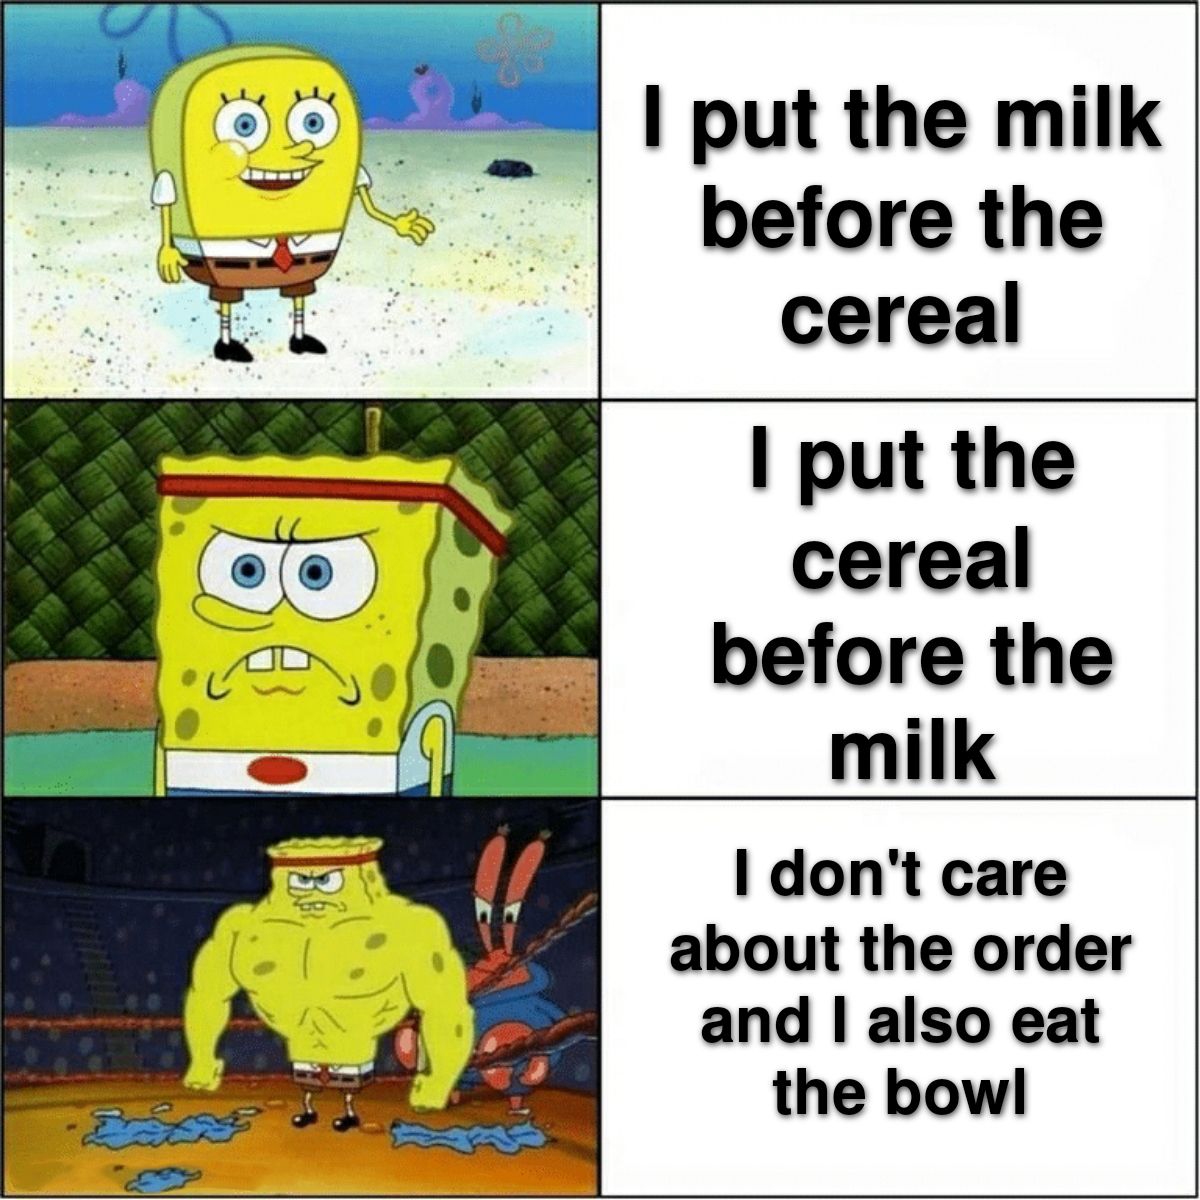 dank memes and funny pics - spongebob meme - B I put the milk before the cereal I put the cereal before the milk I don't care about the order and I also eat the bowl